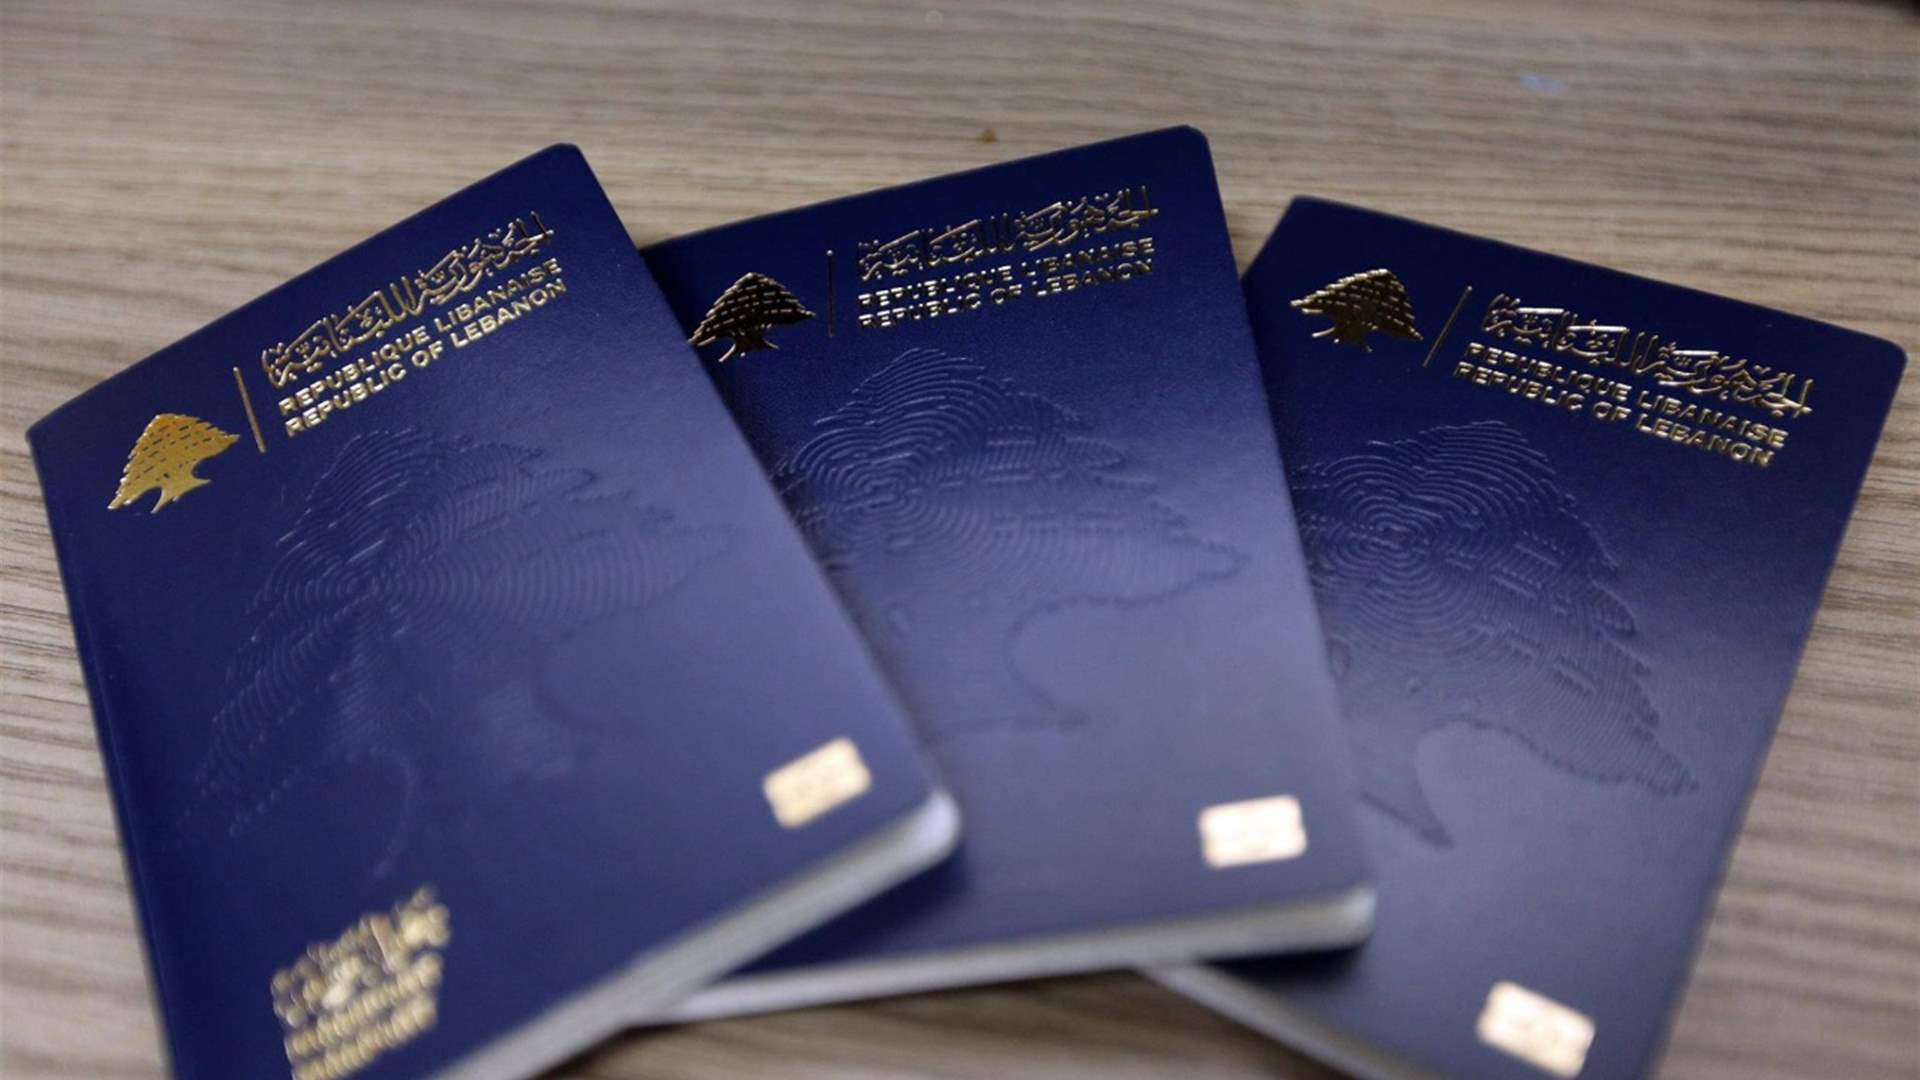 Expats with no biometric passports must renew in Lebanon